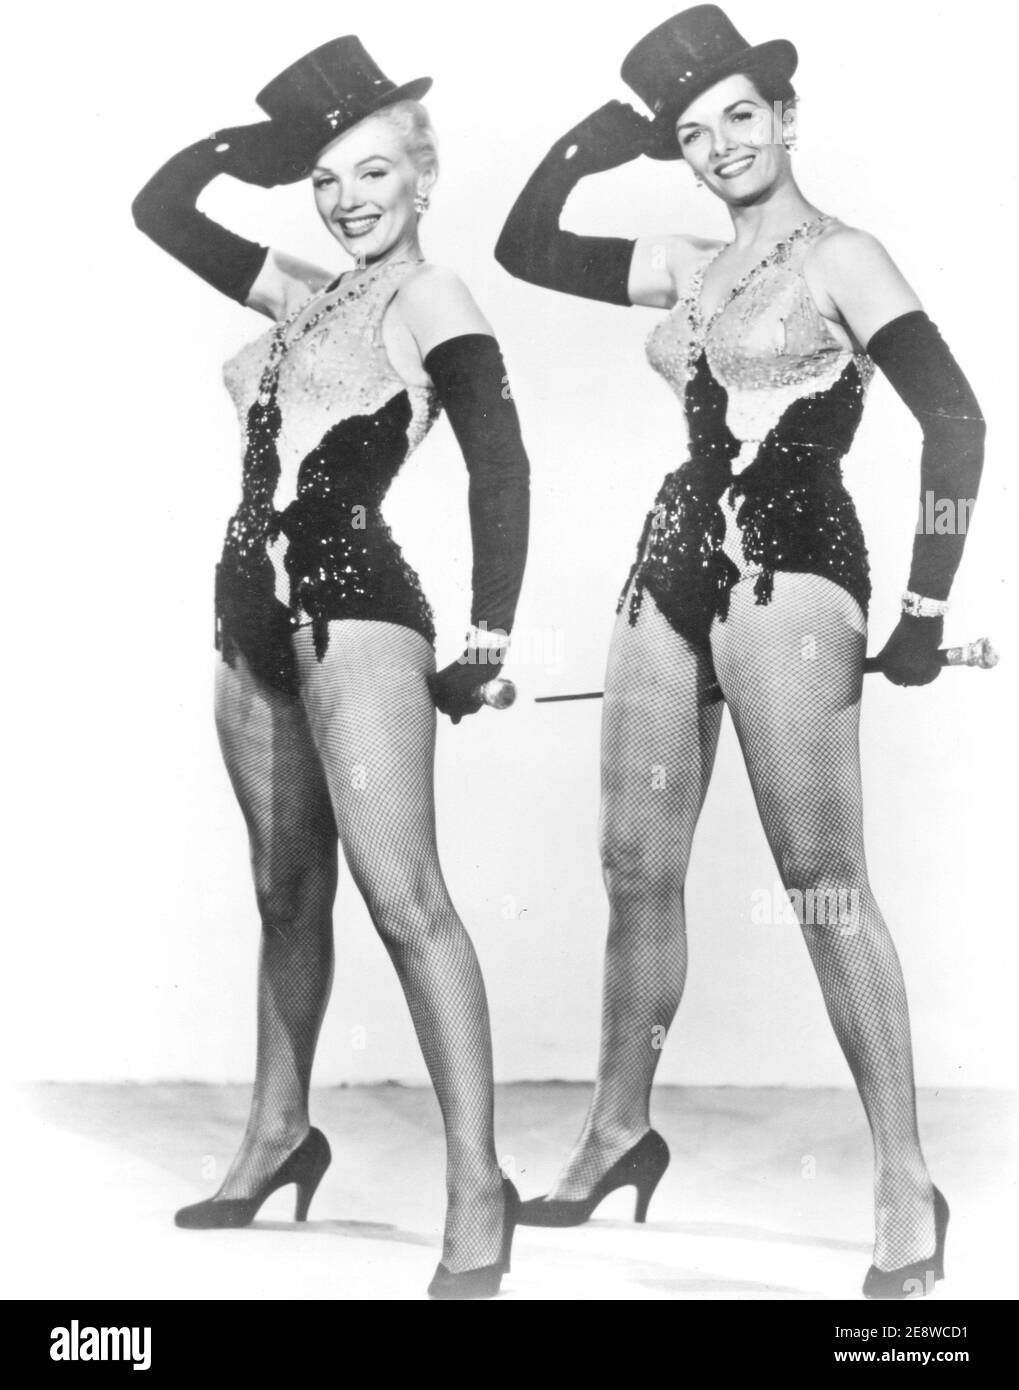 Gentlemen prefer blondes. A 1953 american musical comedy film with premiere July 1 1953 starring Marilyn Monroe and Jane Russell. Jane Russel was born june 21 1921 and died february 28 2011. Stock Photo